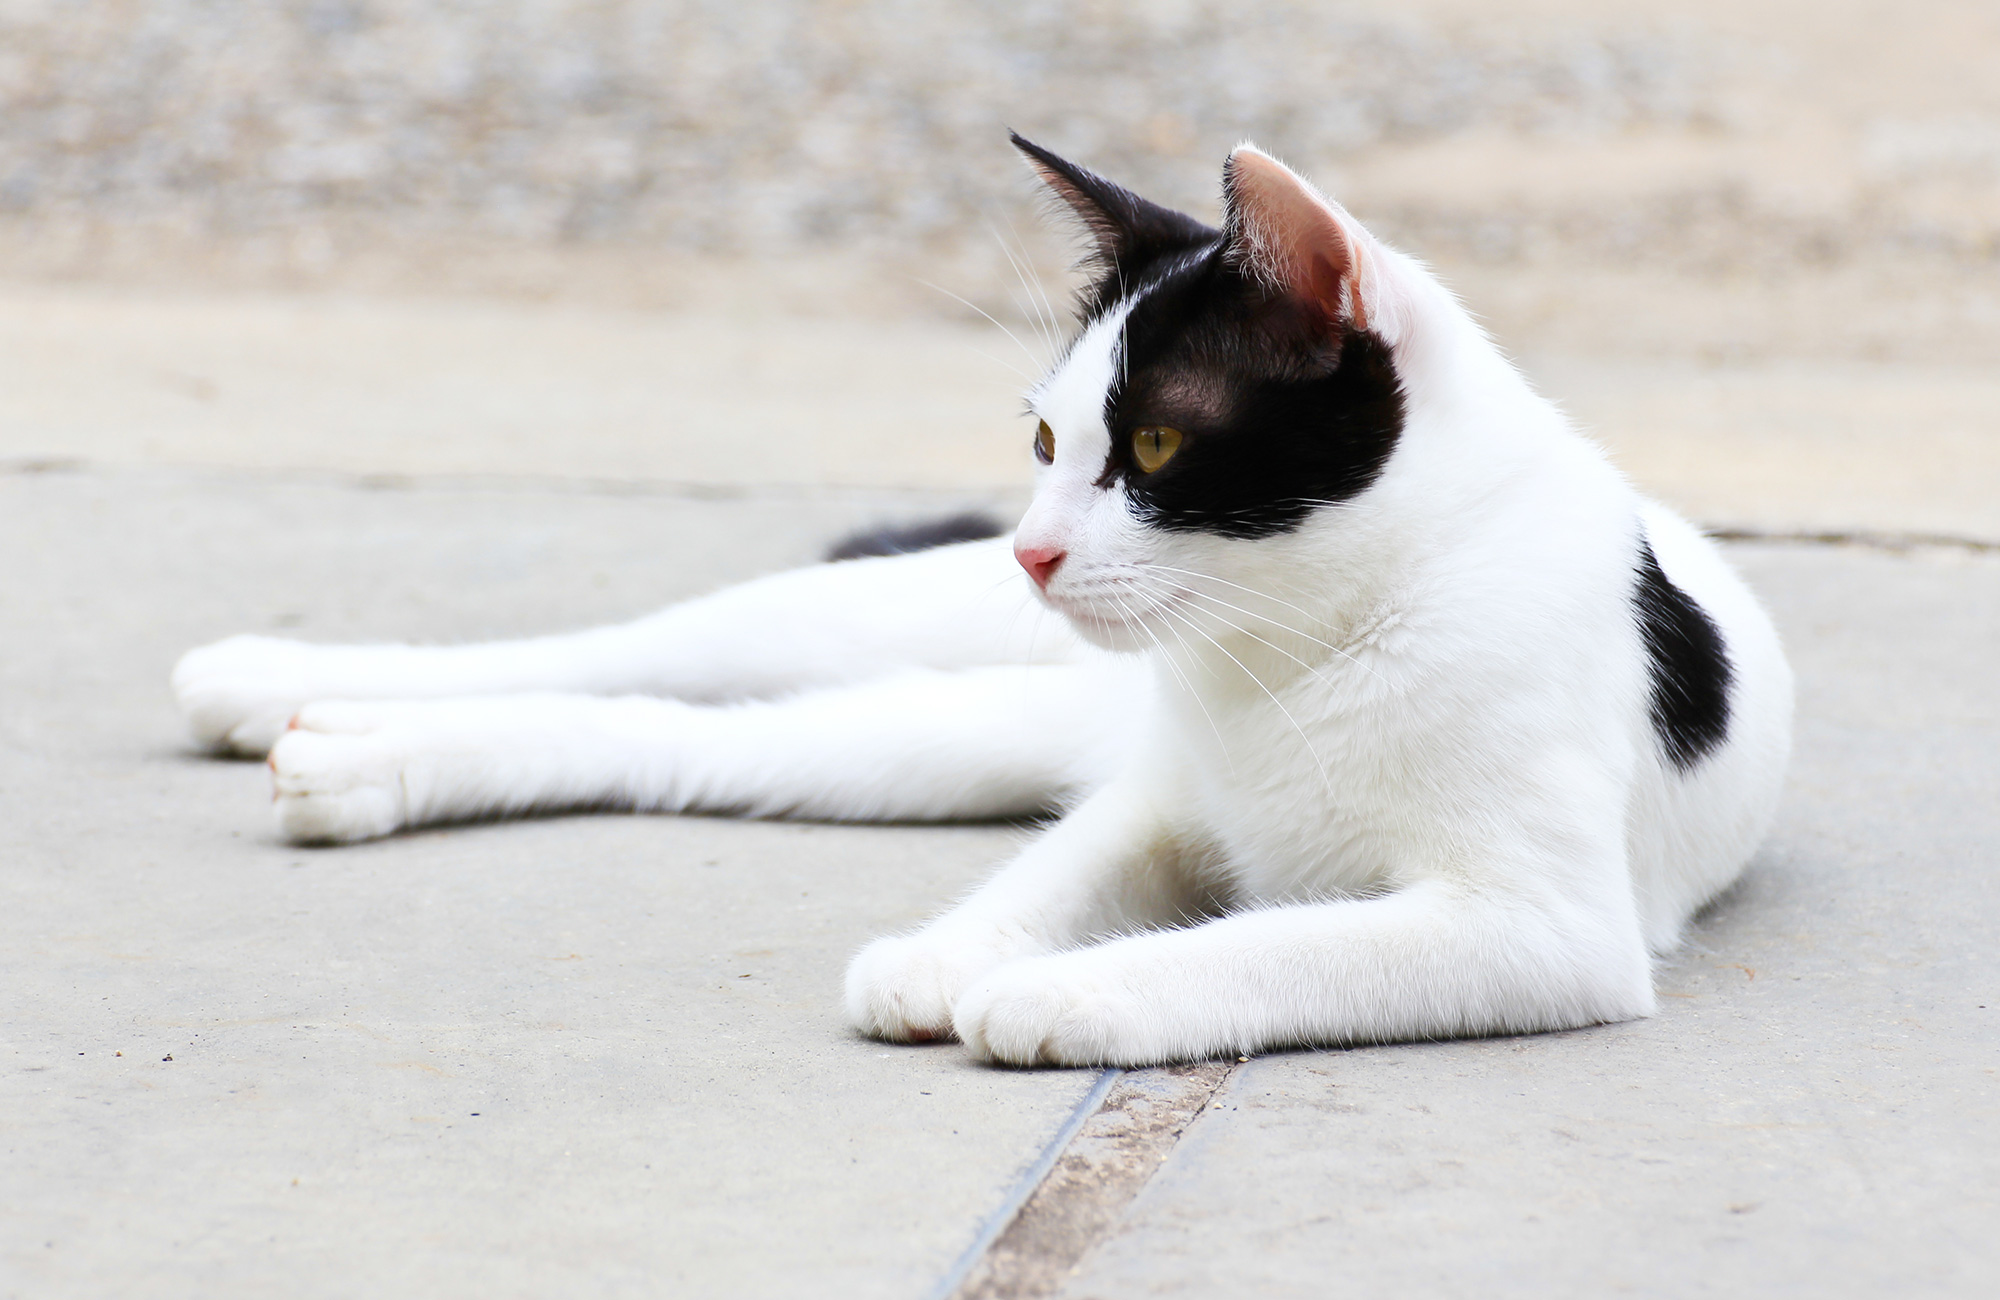 What Breed Is a Black and White Cat？